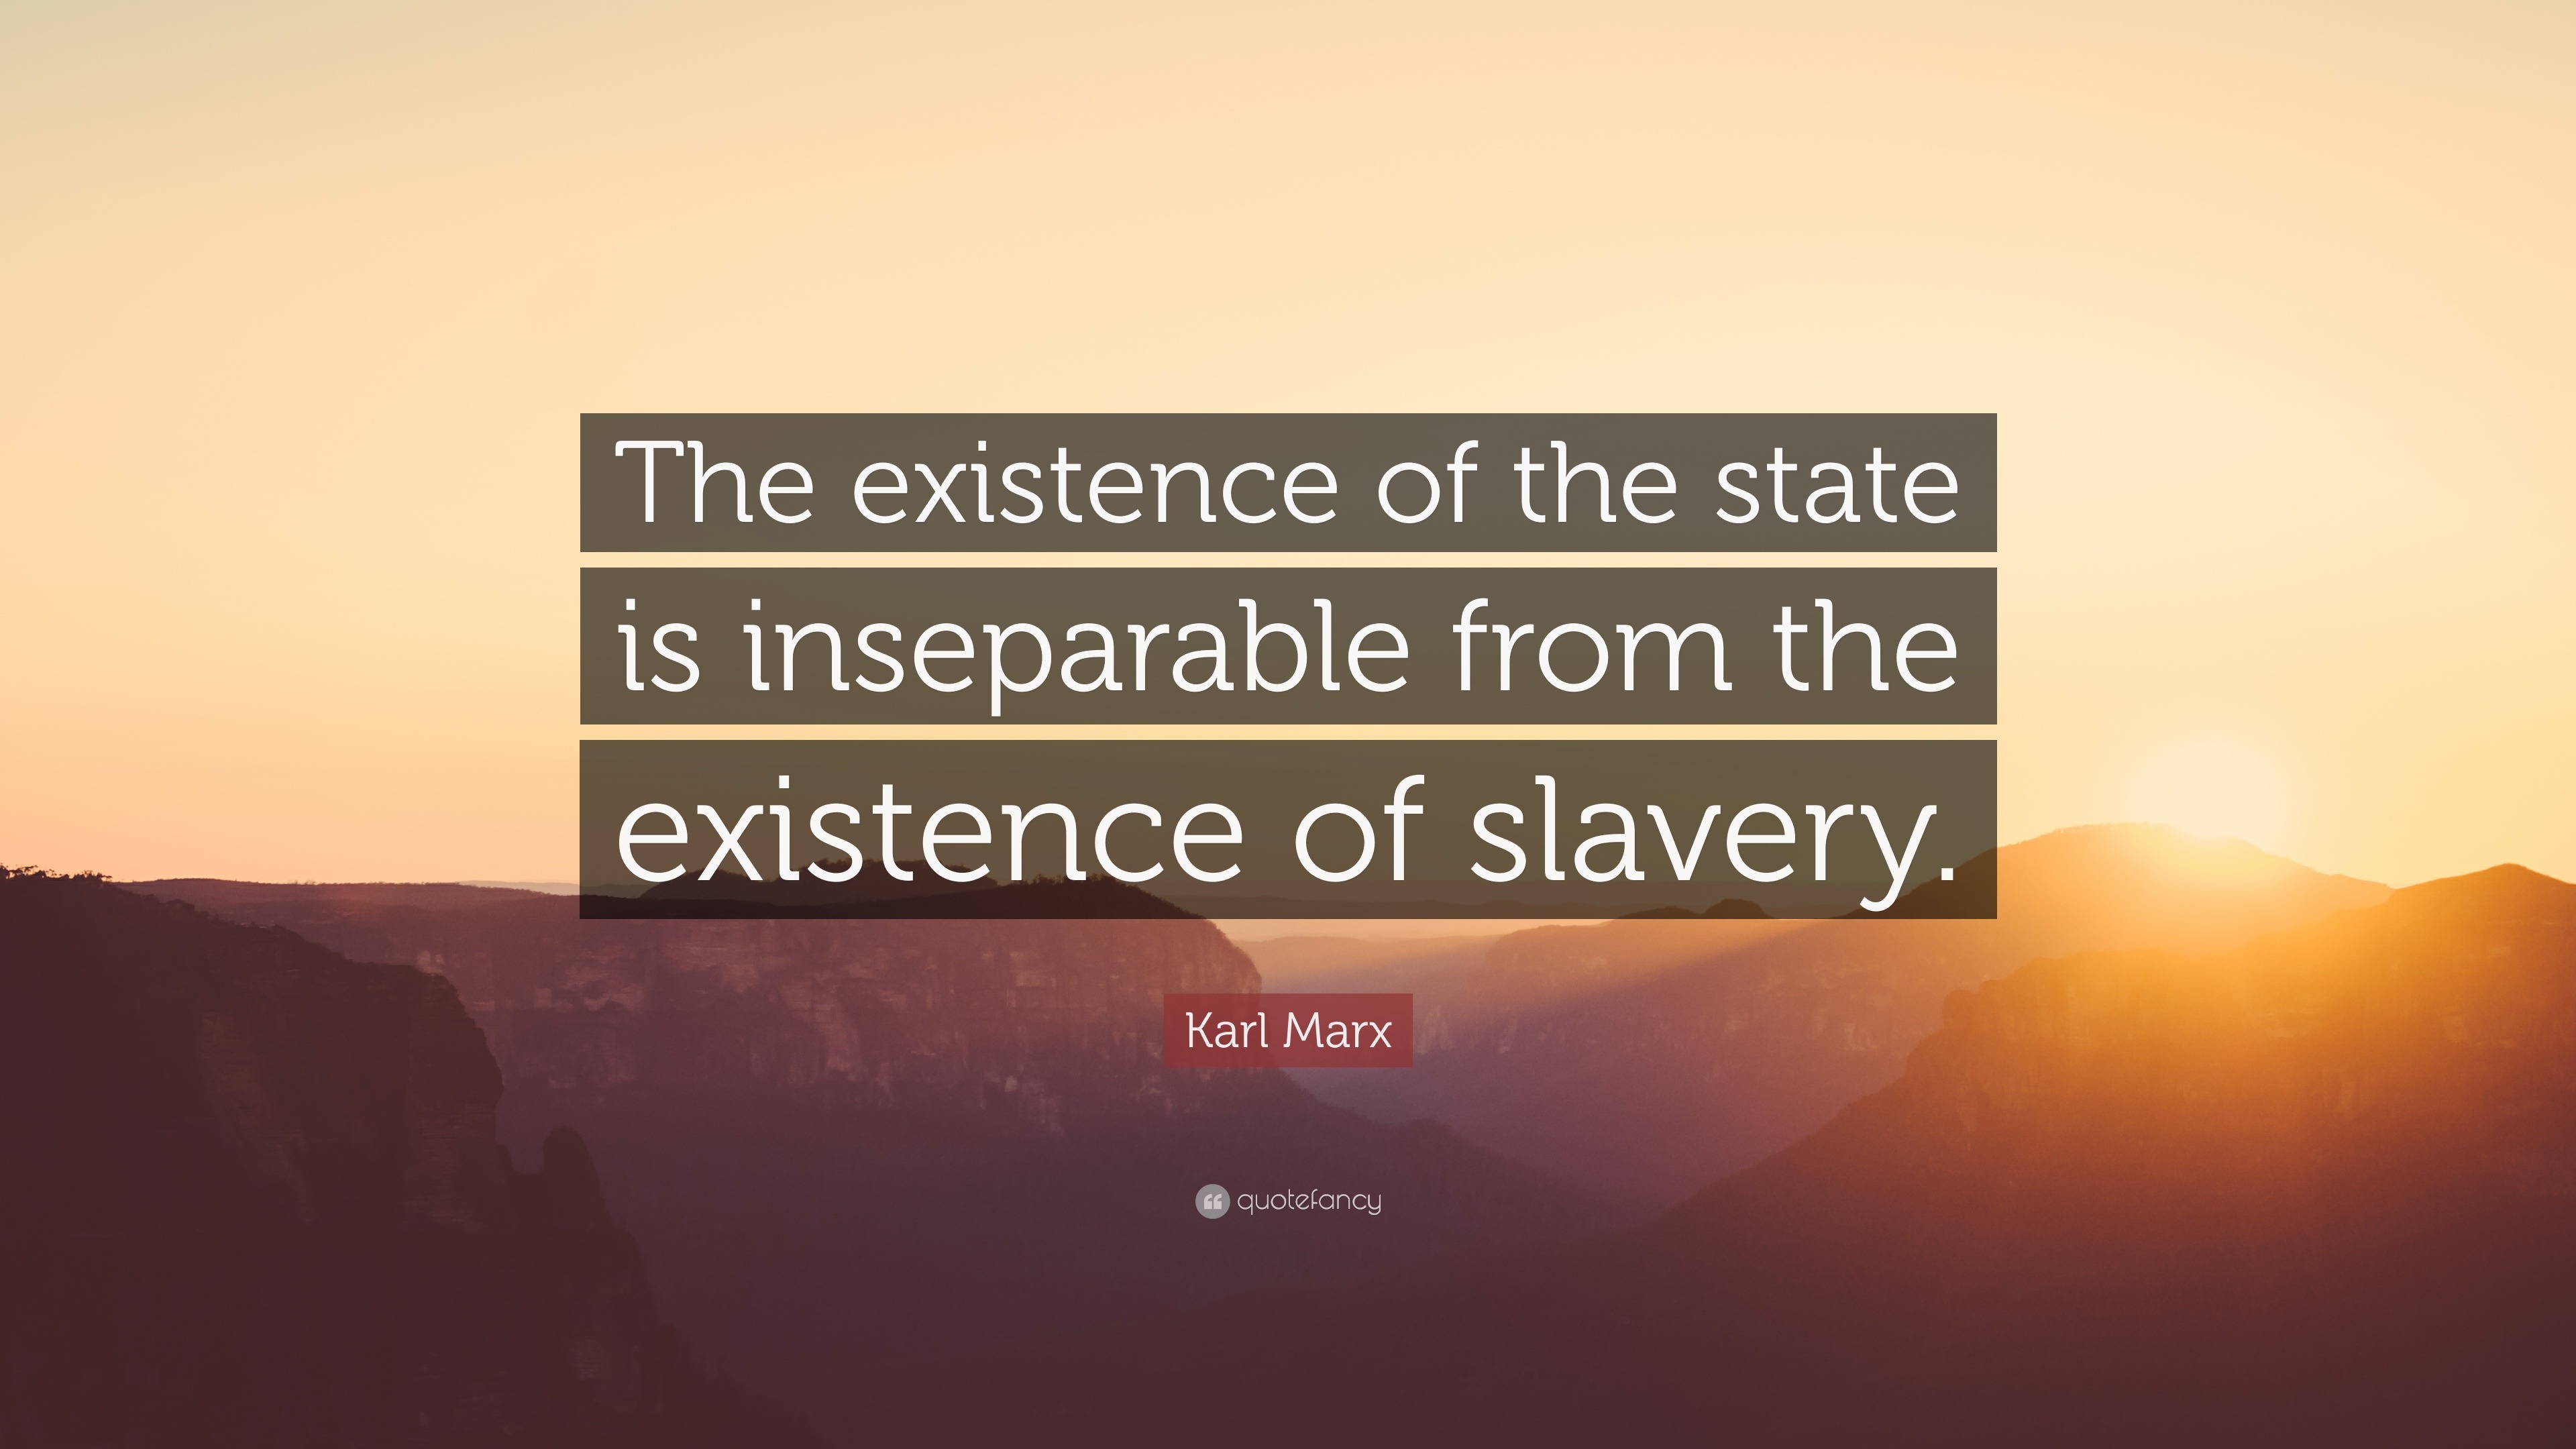 Karl Marx Quote: “The existence of the state is inseparable from the ...